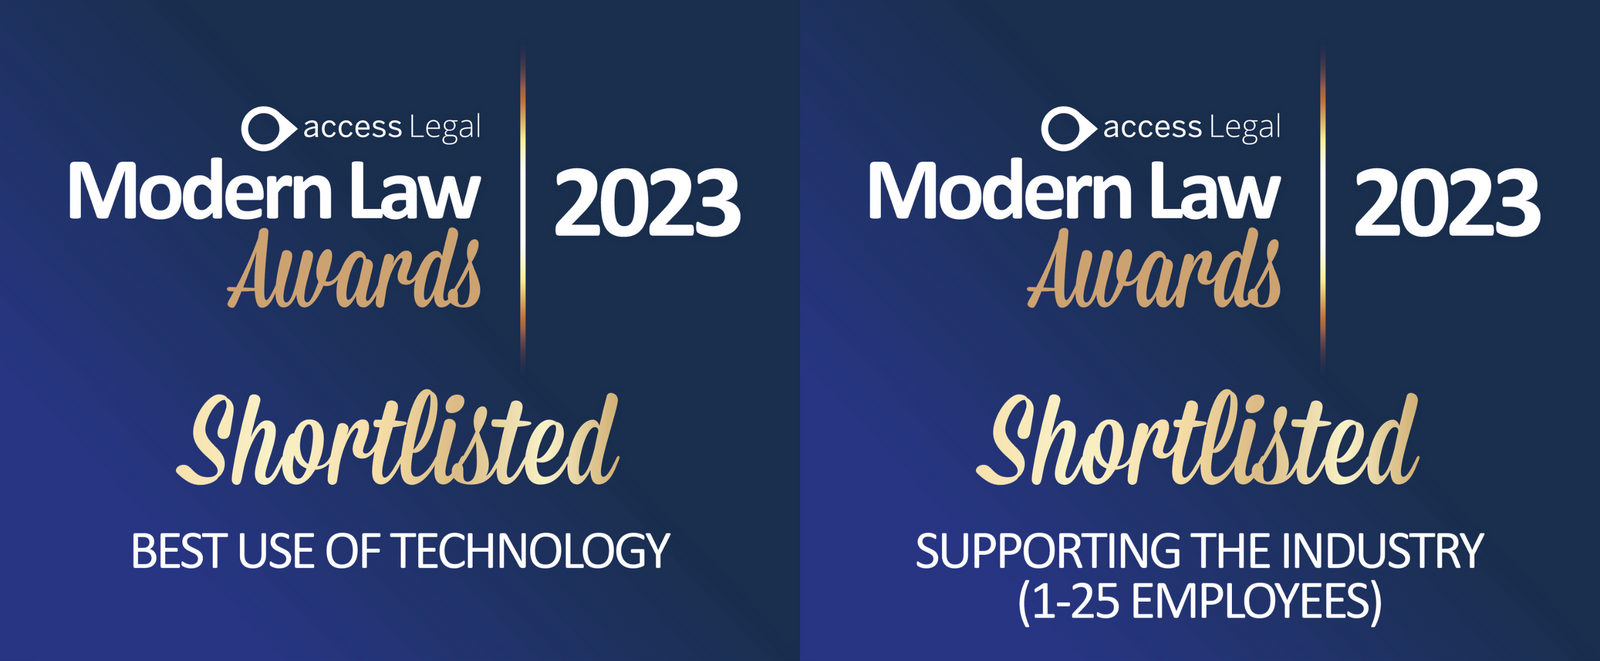 Modern Law Awards 2023 - Shortlisted - Best use of Technology - Supporting the Industry (1-25 Employees)